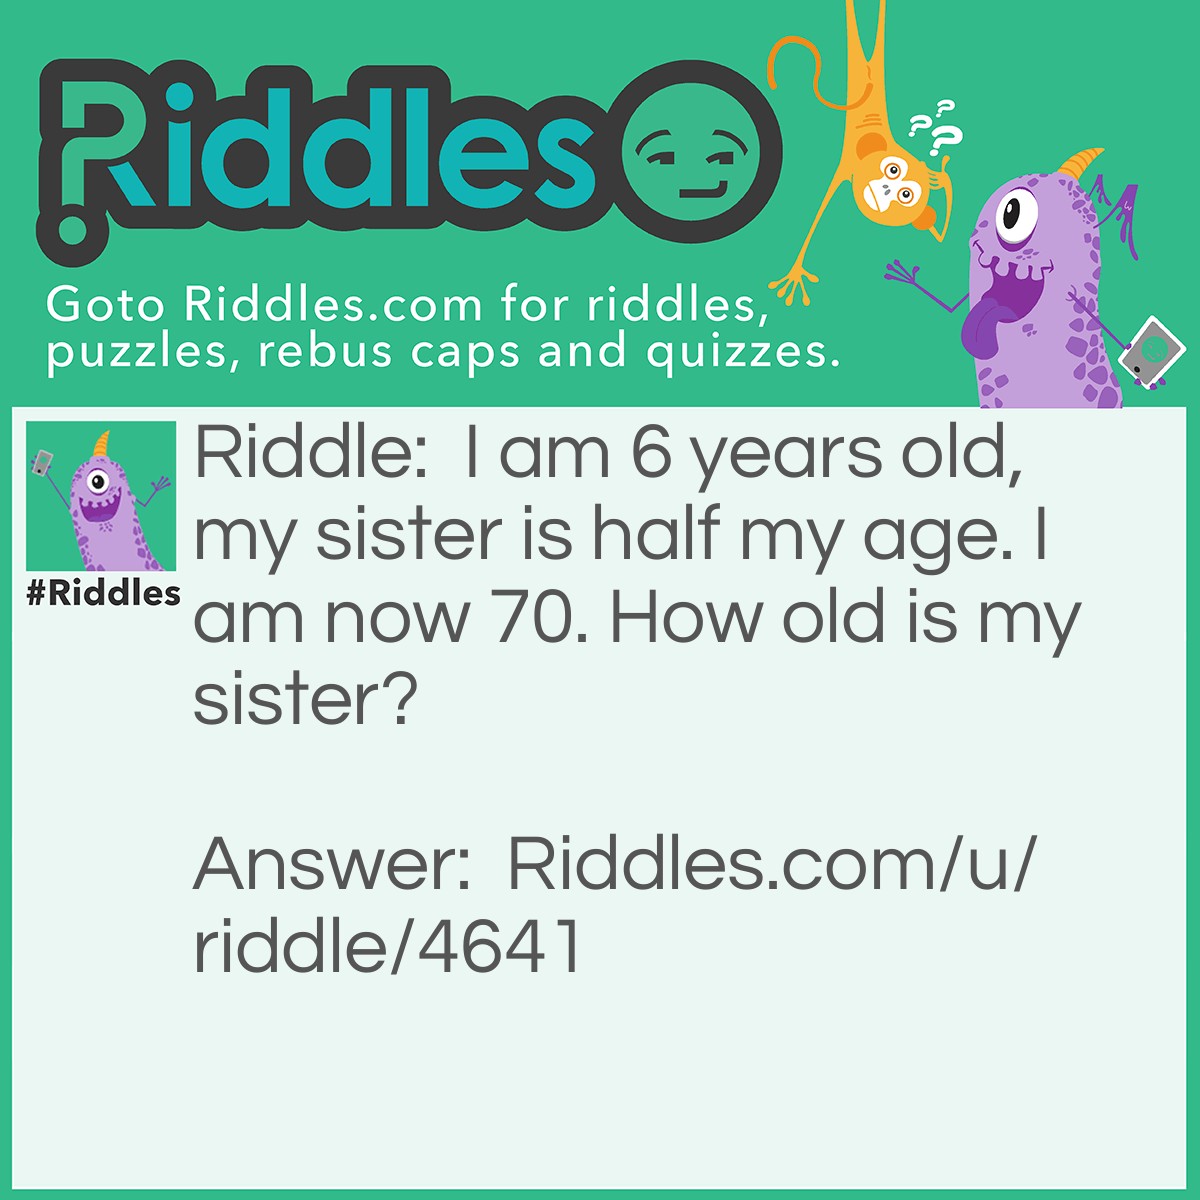 Riddle: I am 6 years old, my sister is half my age. I am now 70. How old is my sister? Answer: 67.